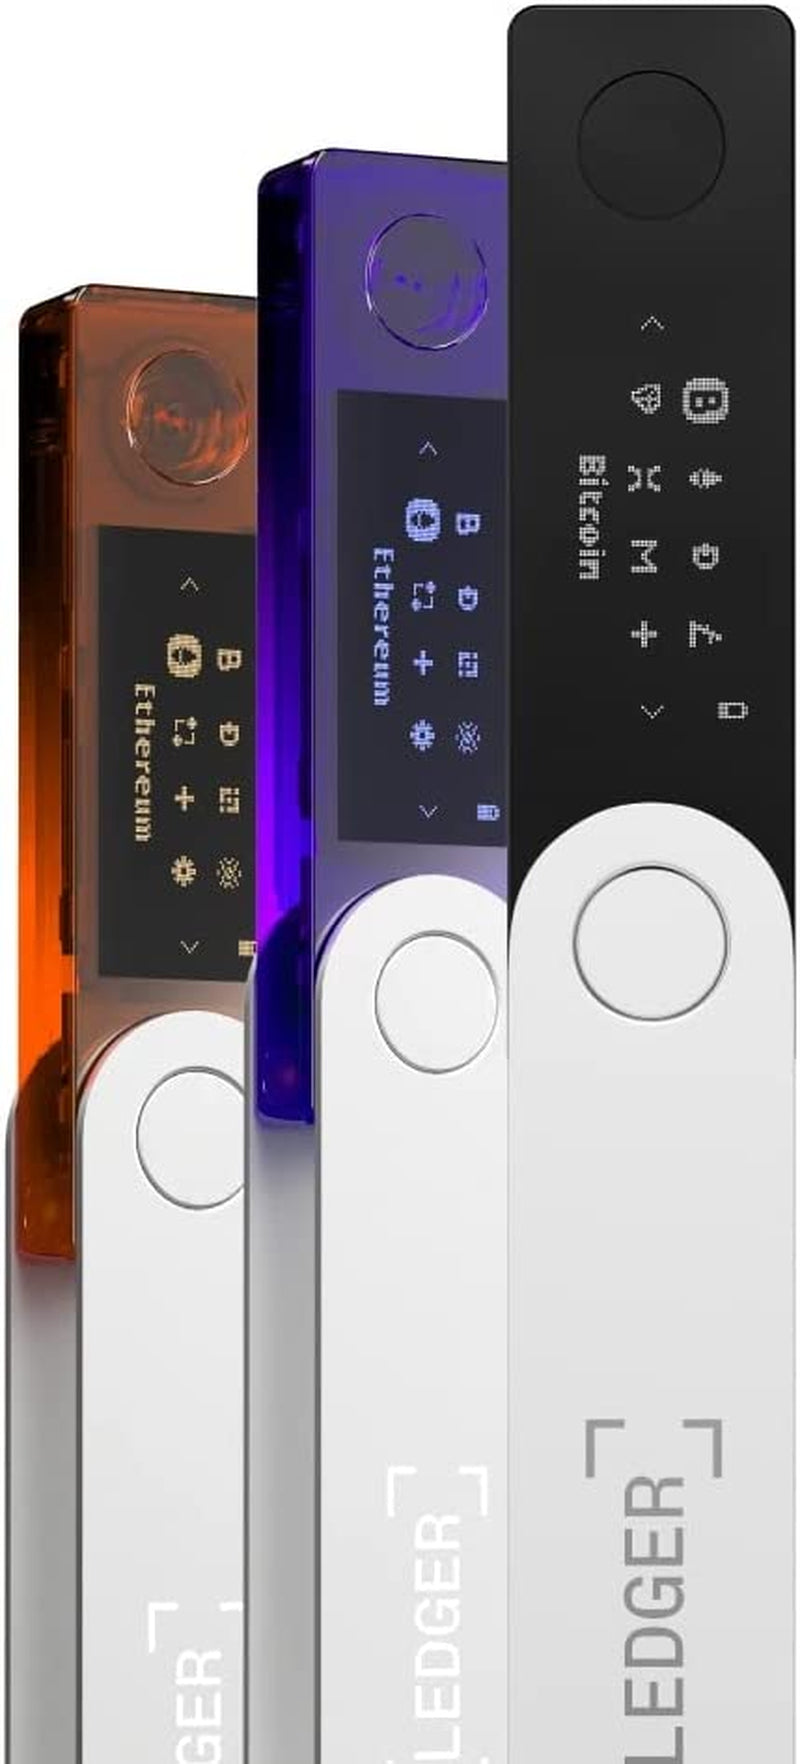 Nano X Crypto Hardware Wallet - Bluetooth - the Best Way to Securely Buy, Manage and Grow All Your Digital Assets